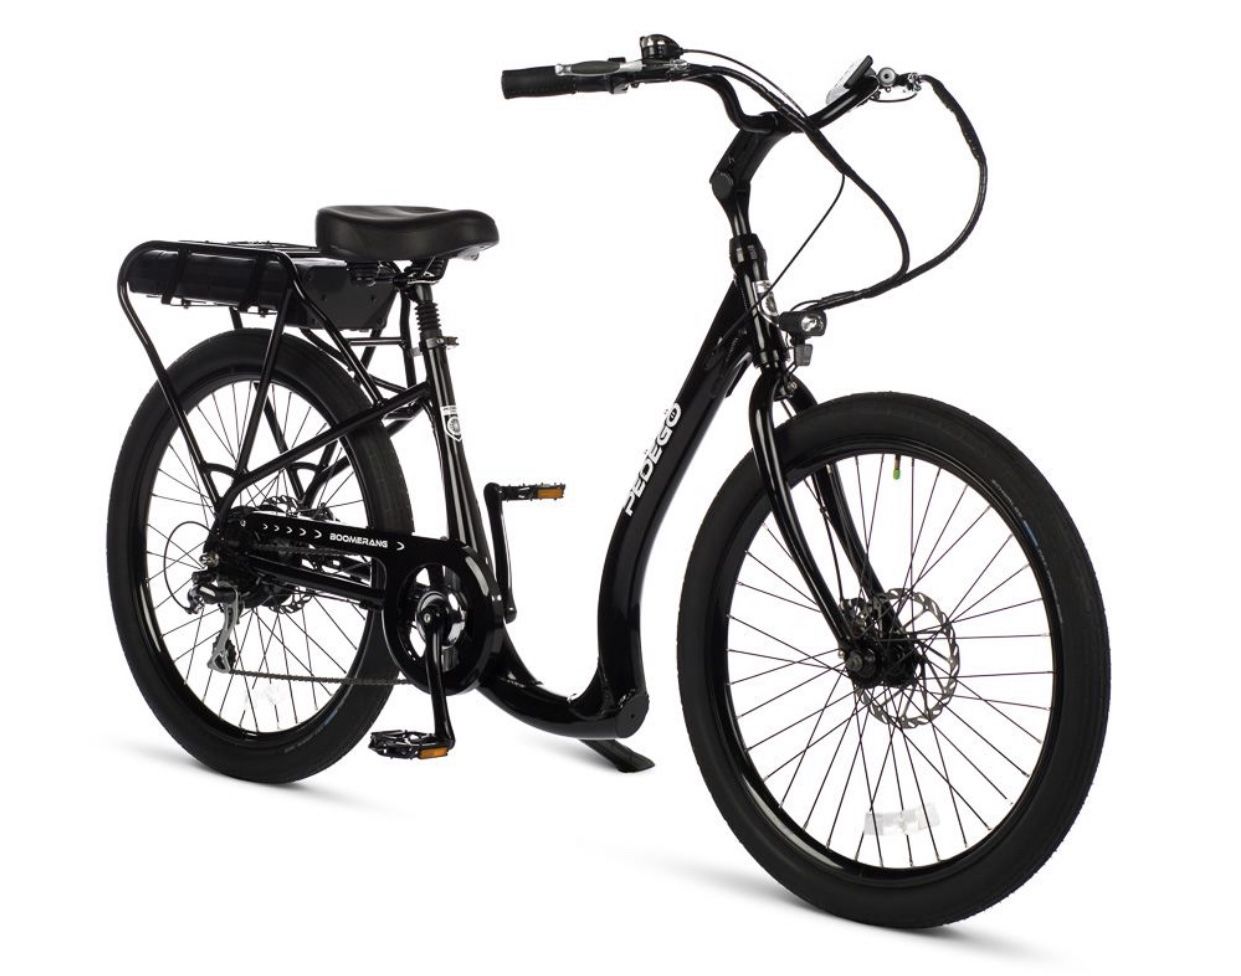 Boomerang electric bicycle on top of the line